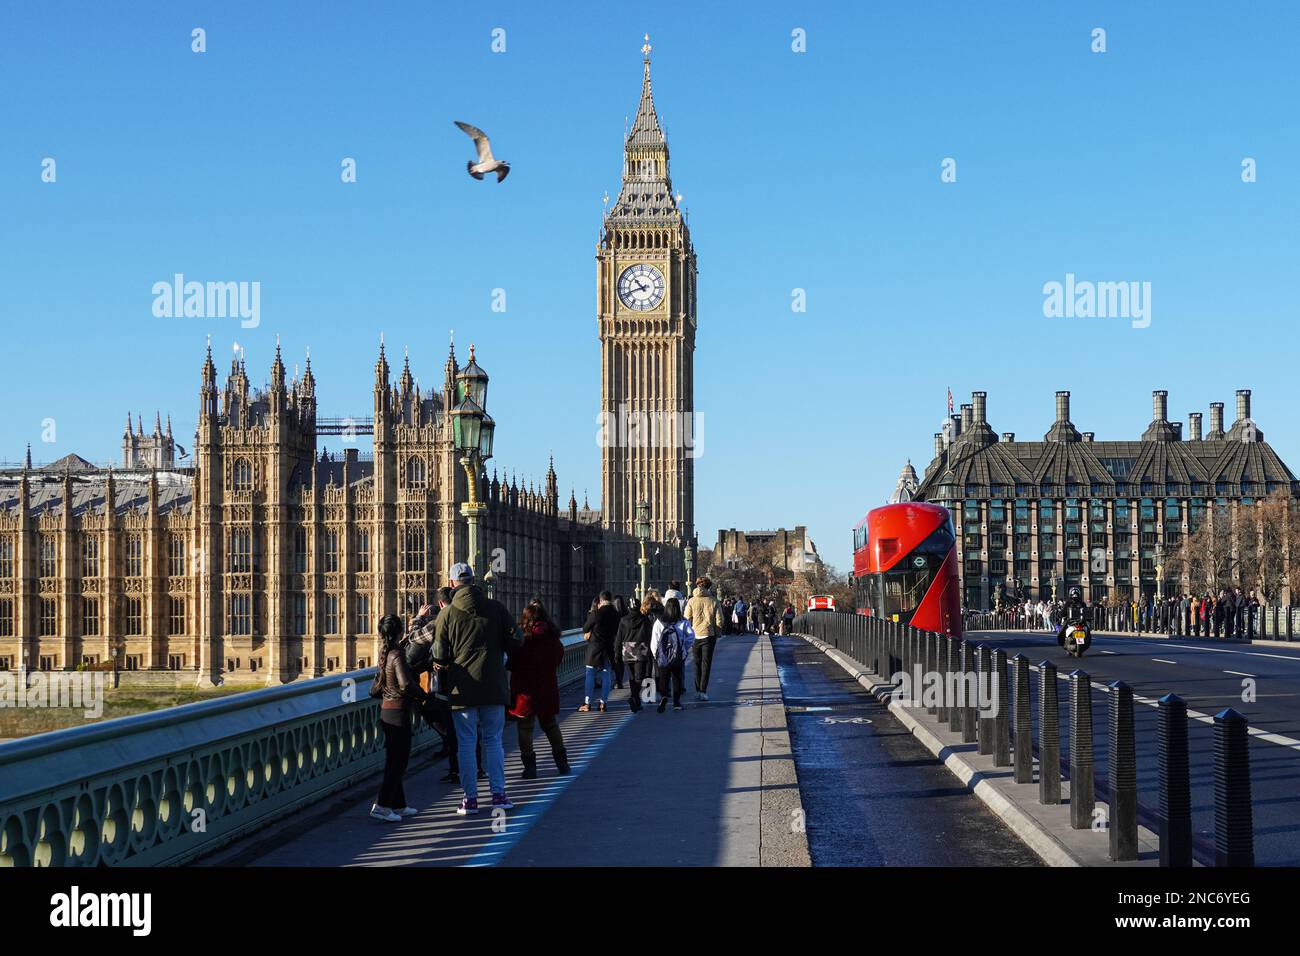 Tourists on Westminster Bridge with the Big Ben clock tower and the Palace of Westminster in the background, London England United Kingdom UK Stock Photo